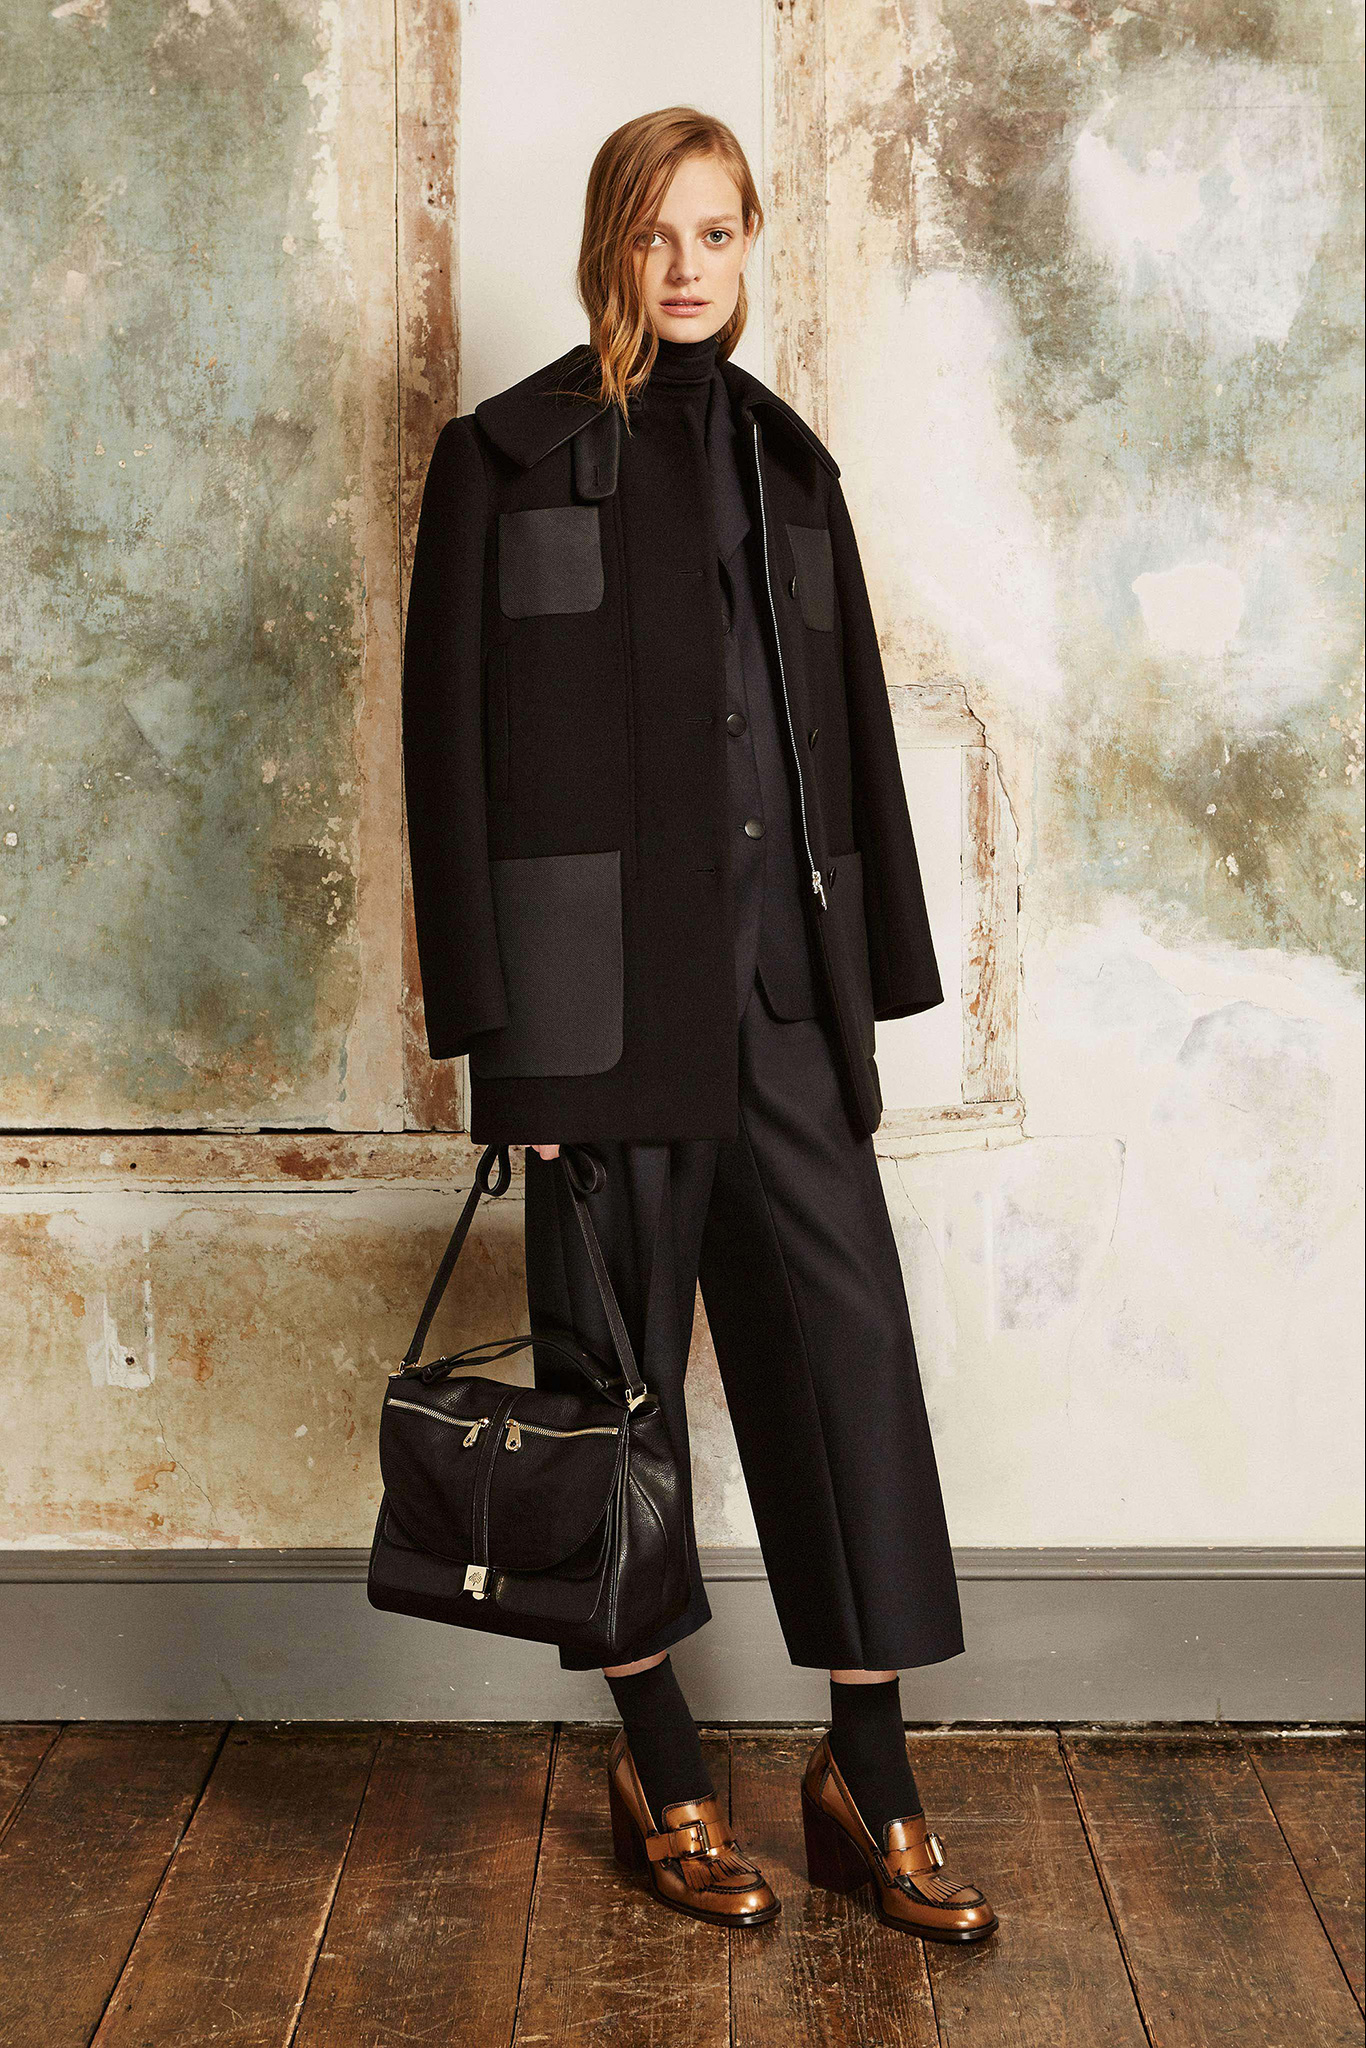 MULBERRY - PRE AUTUMN/WINTER 2015-16 READY-TO-WEAR